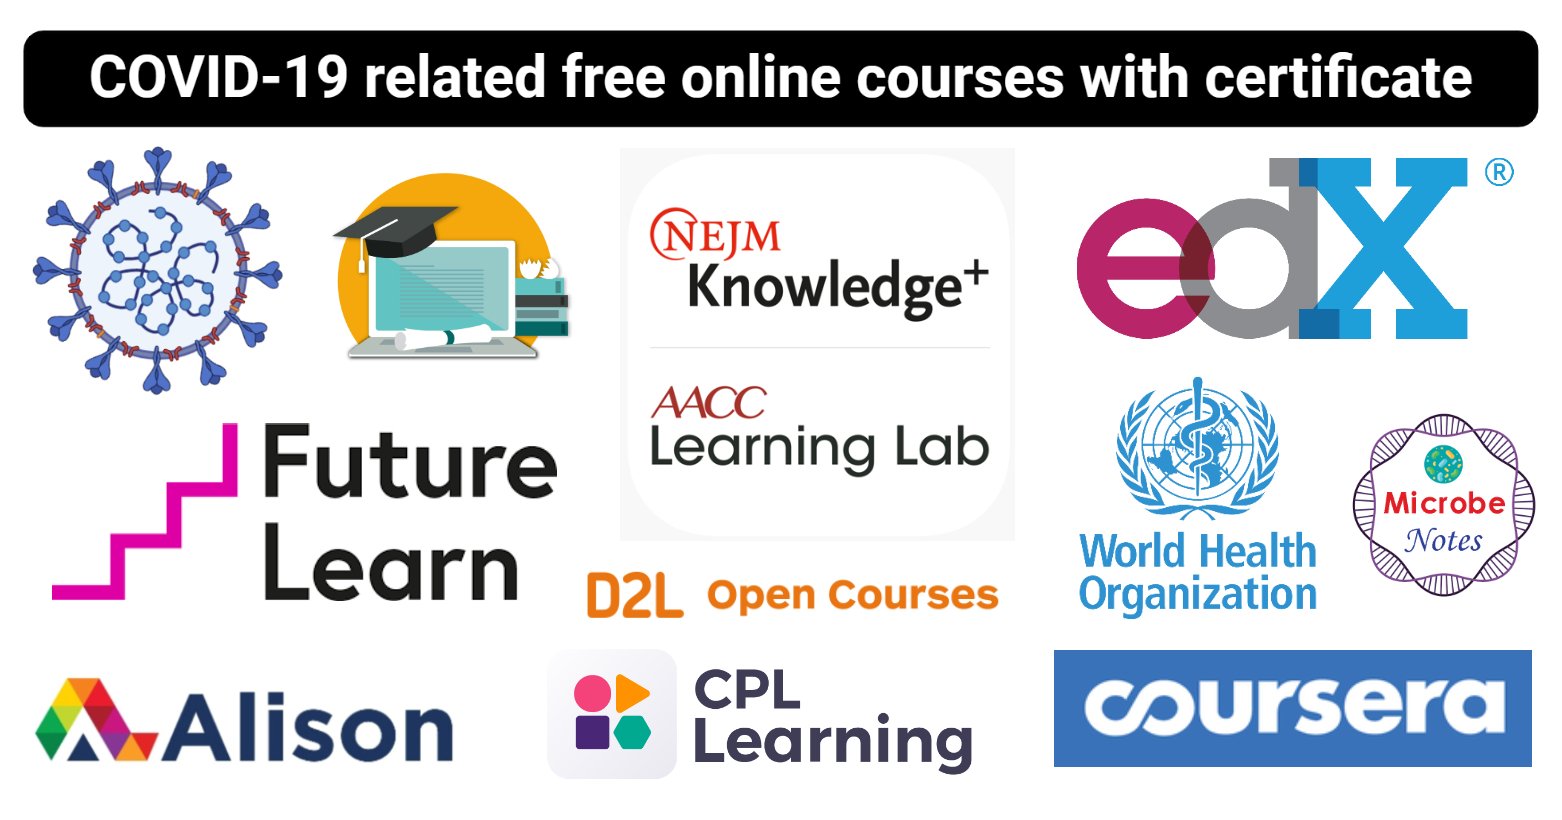 COVID-19 related free online courses with certificate